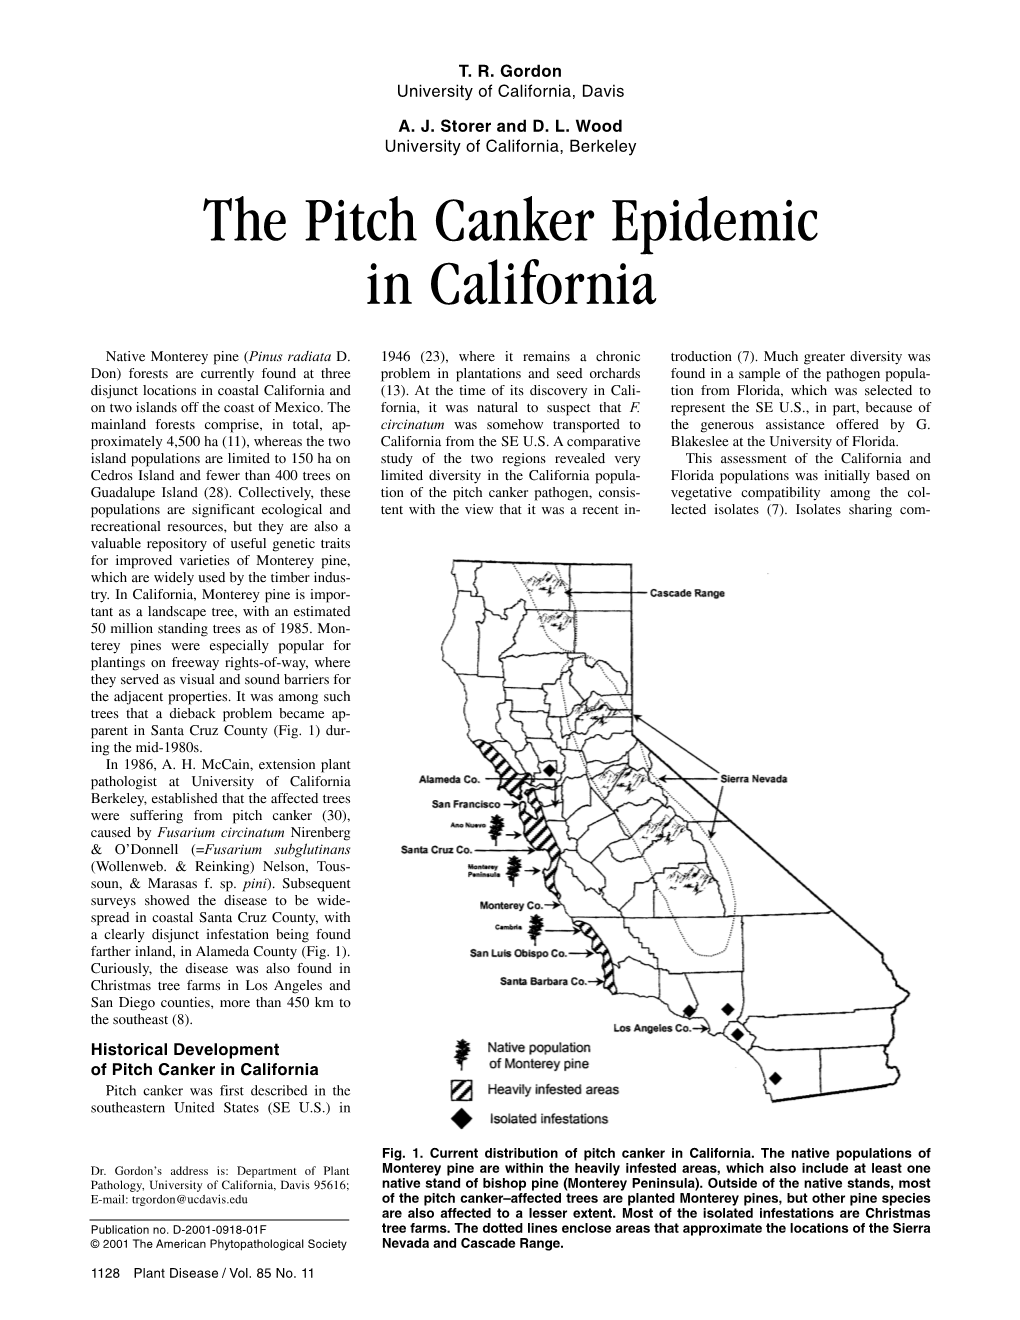 2001 Plant Disease: the Pitch Canker Epidemic in California